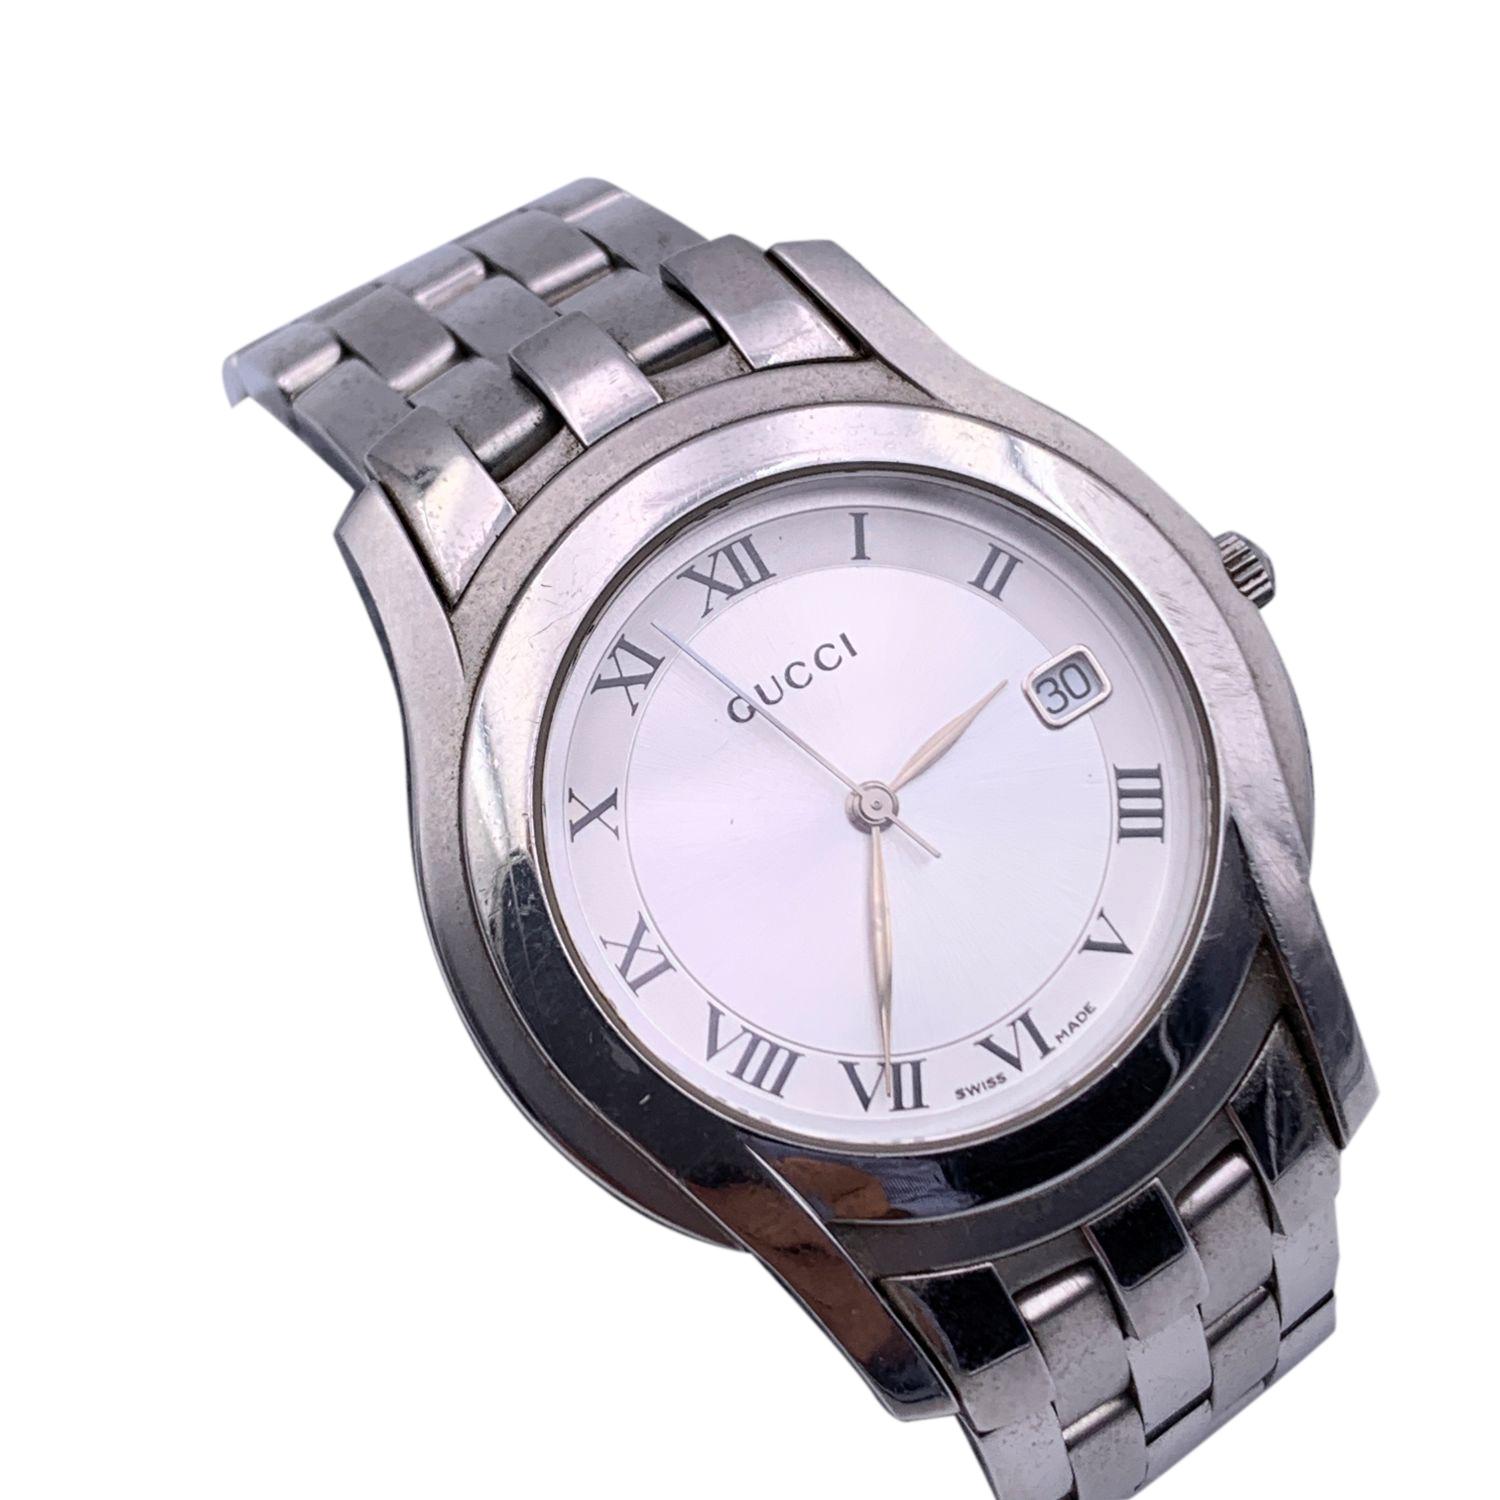 Gucci silver tone stainless steel wrist watch, mod. 5500 M. Silver Dial. Date at 3 o'clock. Sapphire crystal. Swiss Made Quartz movement. Gucci written on face. Roman numbers. Gucci crest on the reverse of the case. GUCCI logo engraved on the clasp.